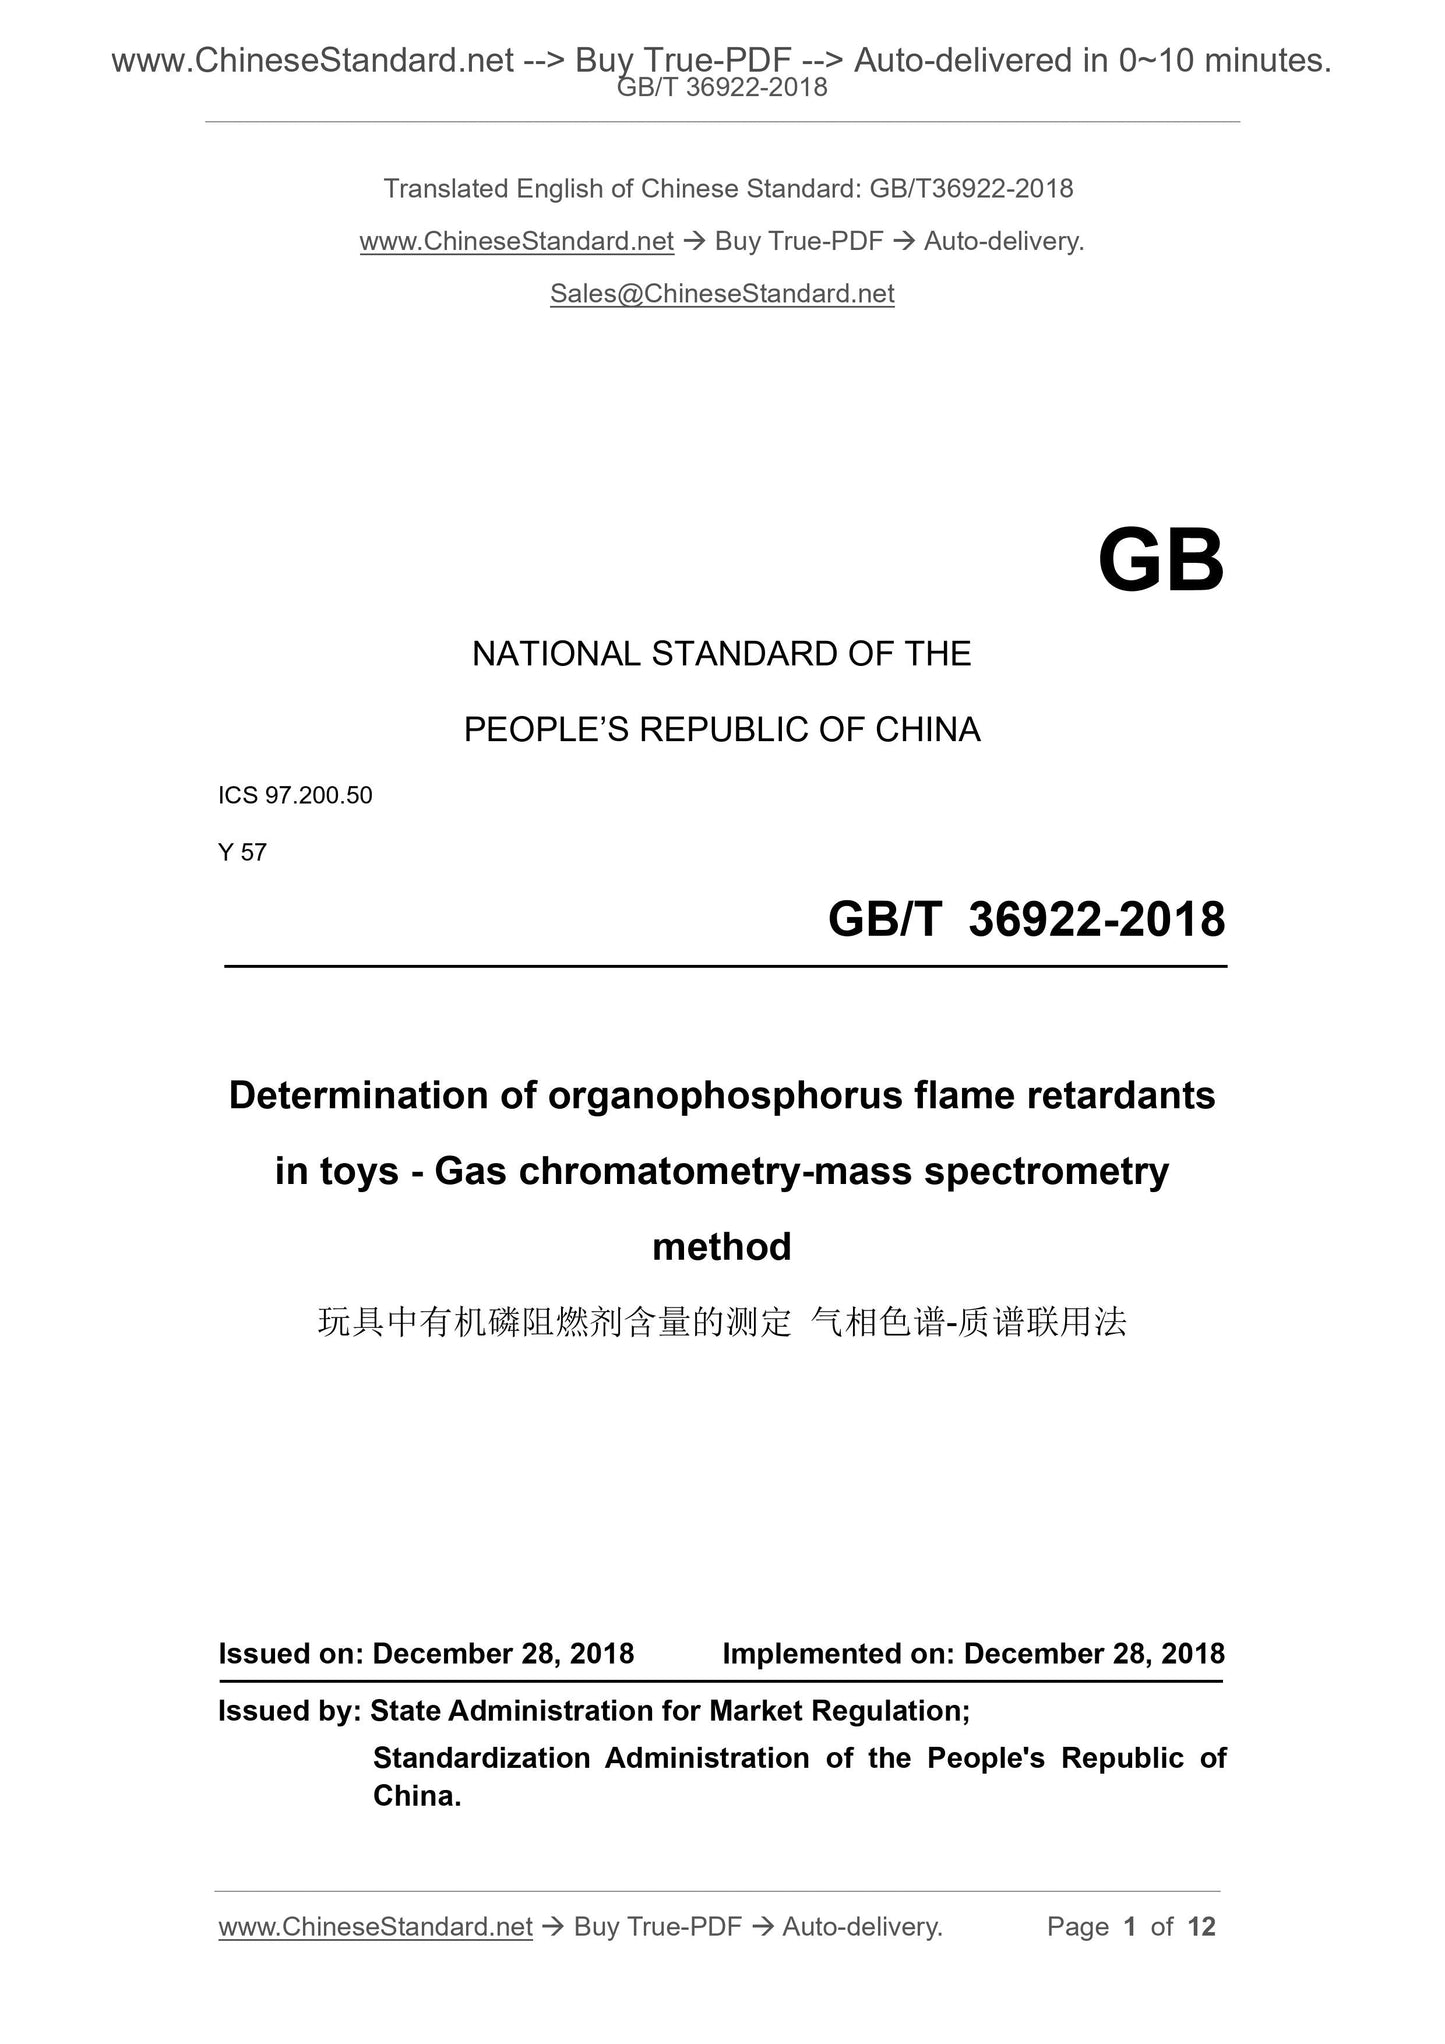 GB/T 36922-2018 Page 1